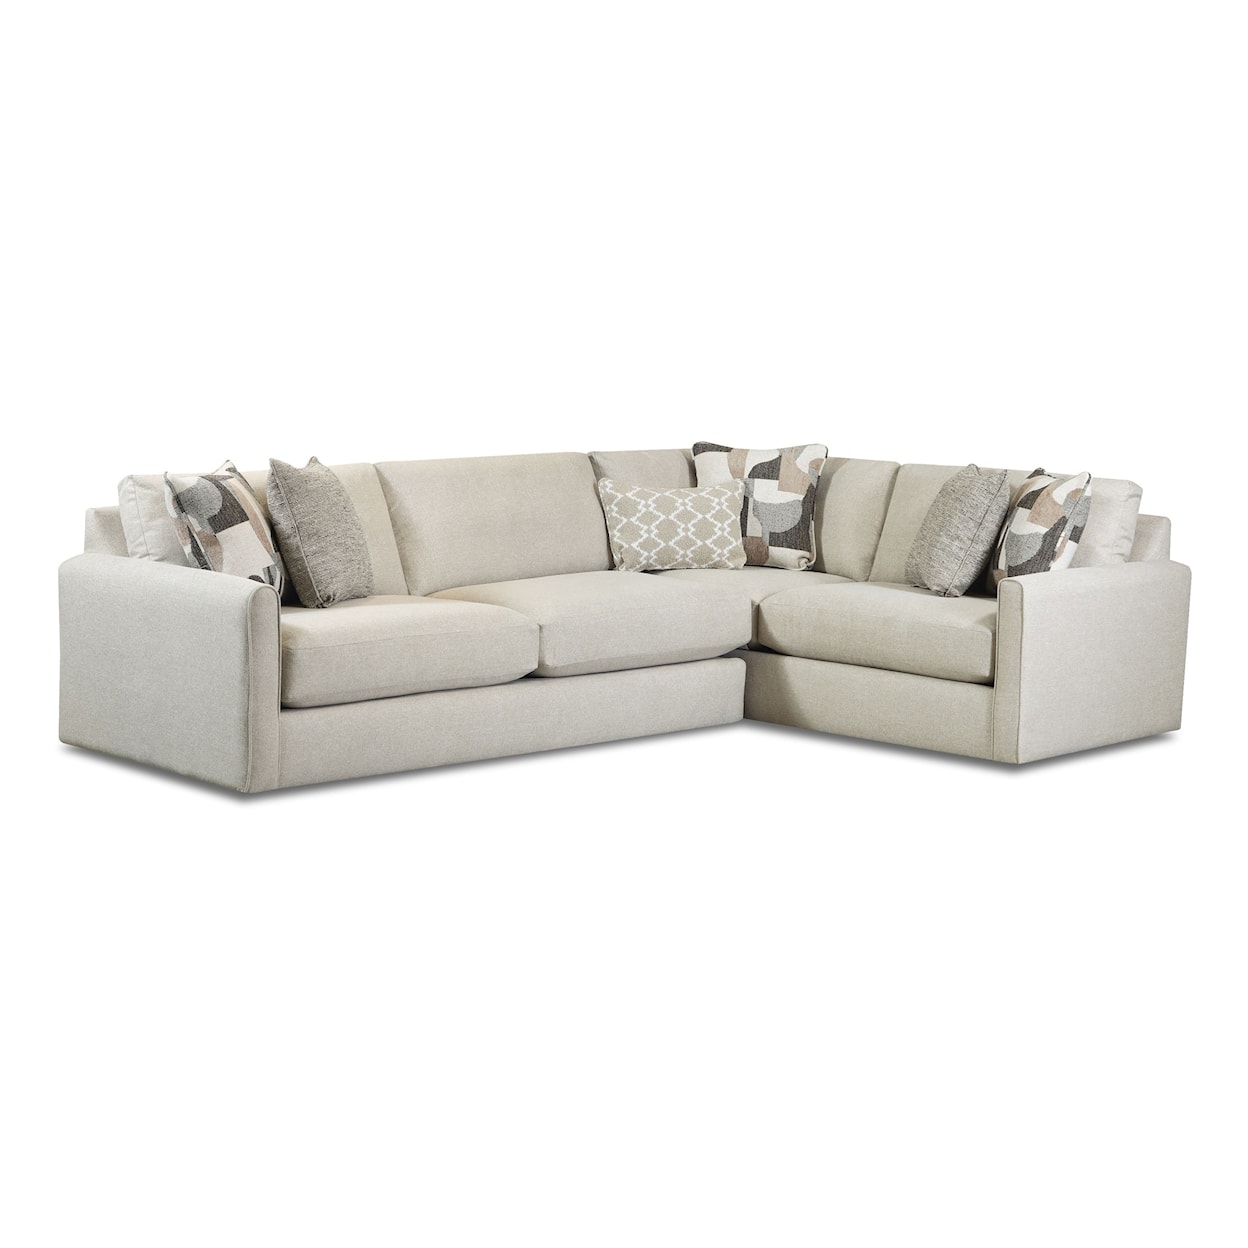 Fusion Furniture 7000 GOLD RUSH ANTIQUE L-Shape Sectional